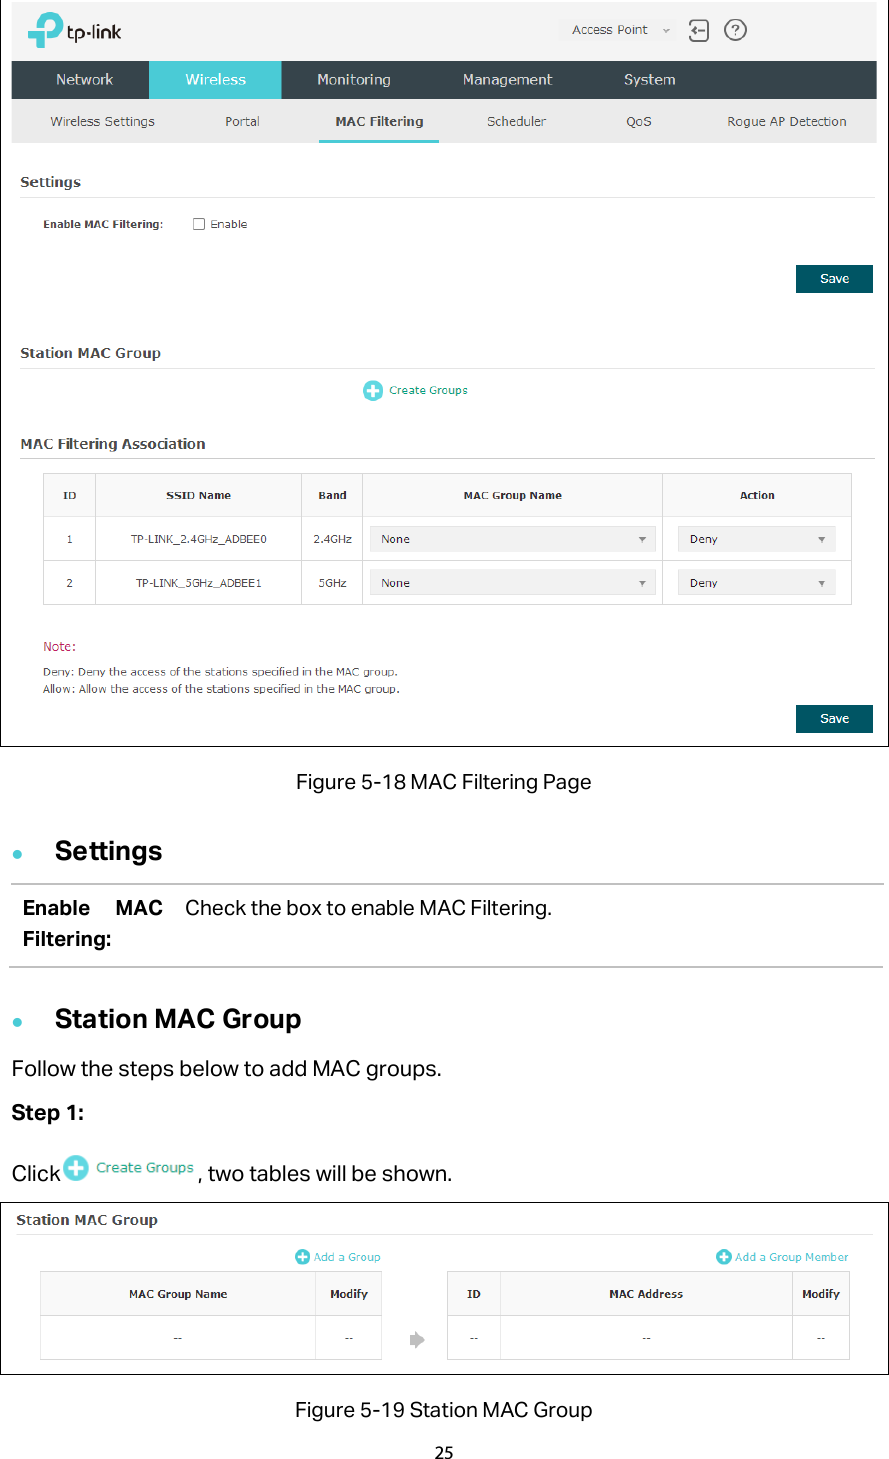  Figure 5-18 MAC Filtering Page  Settings Enable MAC Filtering: Check the box to enable MAC Filtering.  Station MAC Group Follow the steps below to add MAC groups. Step 1:   Click , two tables will be shown.  Figure 5-19 Station MAC Group 25  